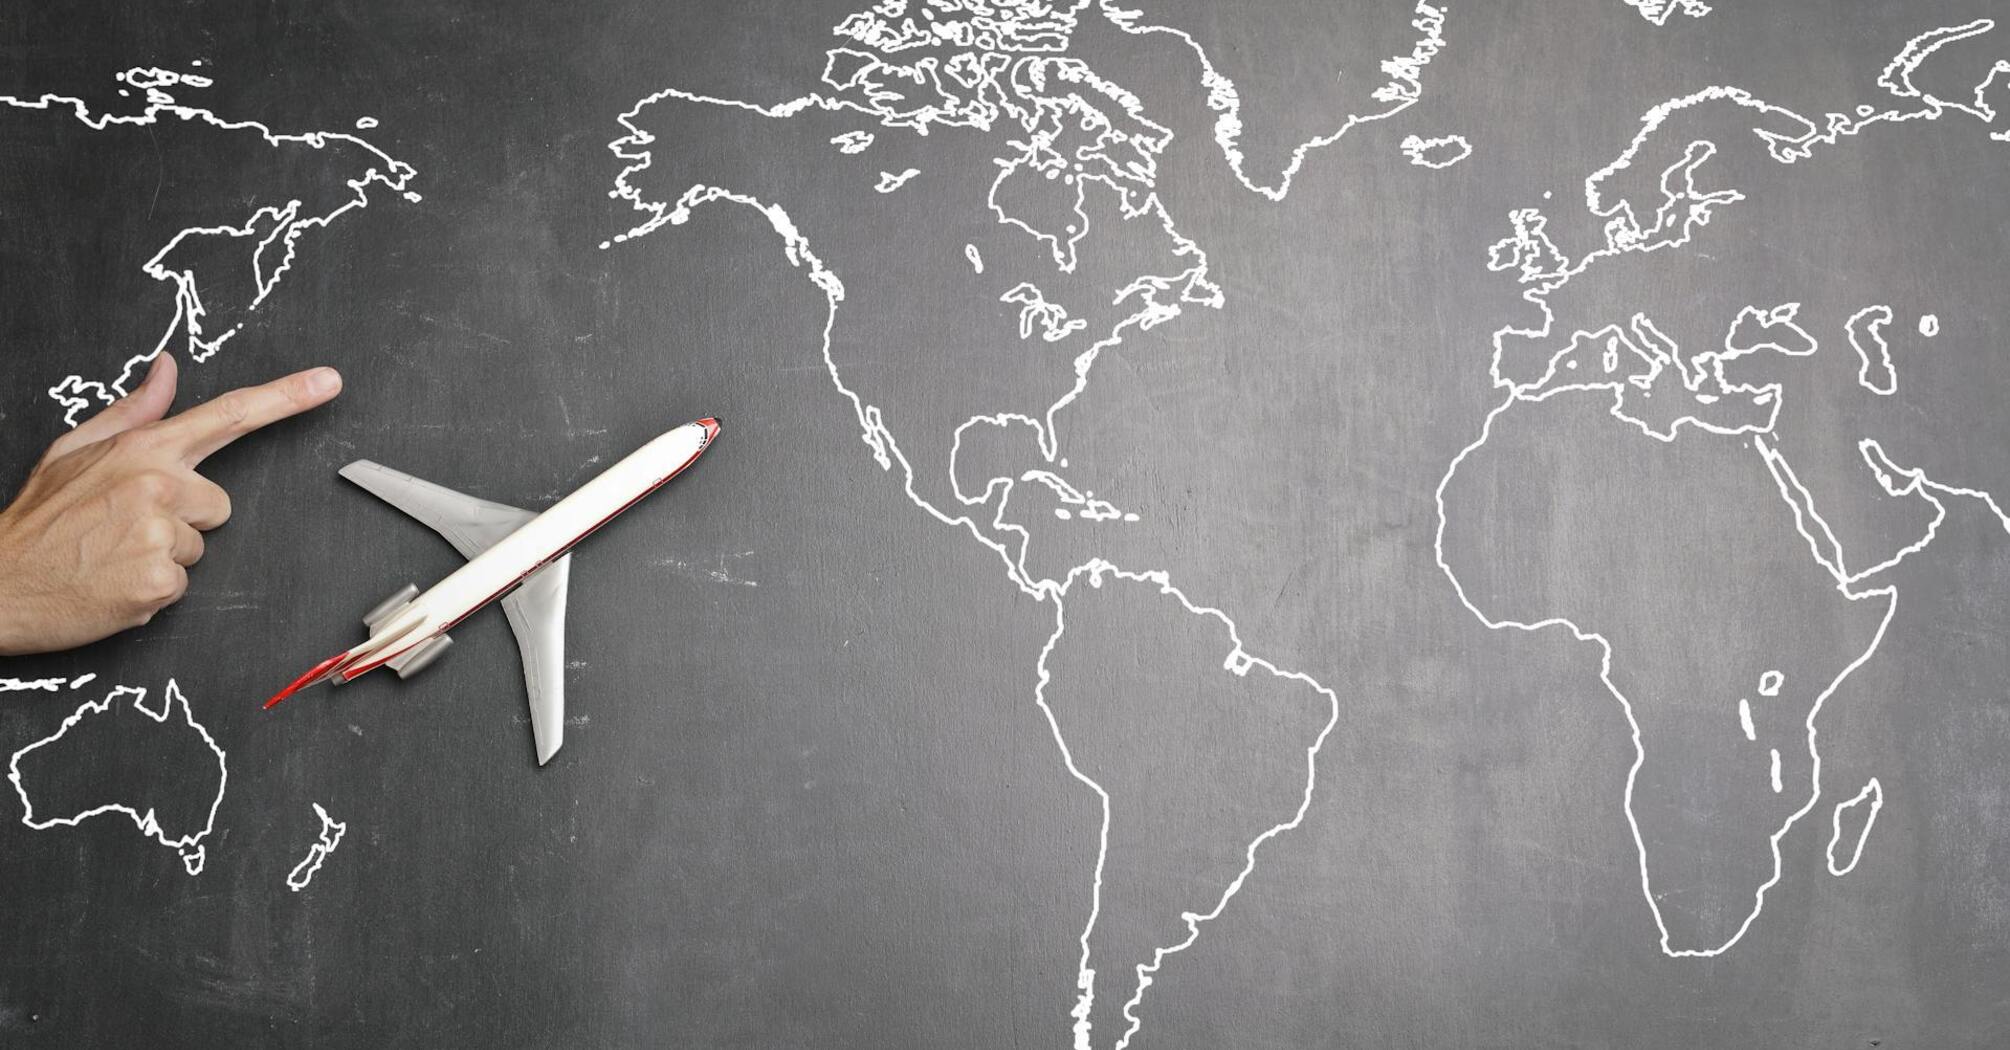 Hand pointing to a toy airplane on a world map drawn on a chalkboard